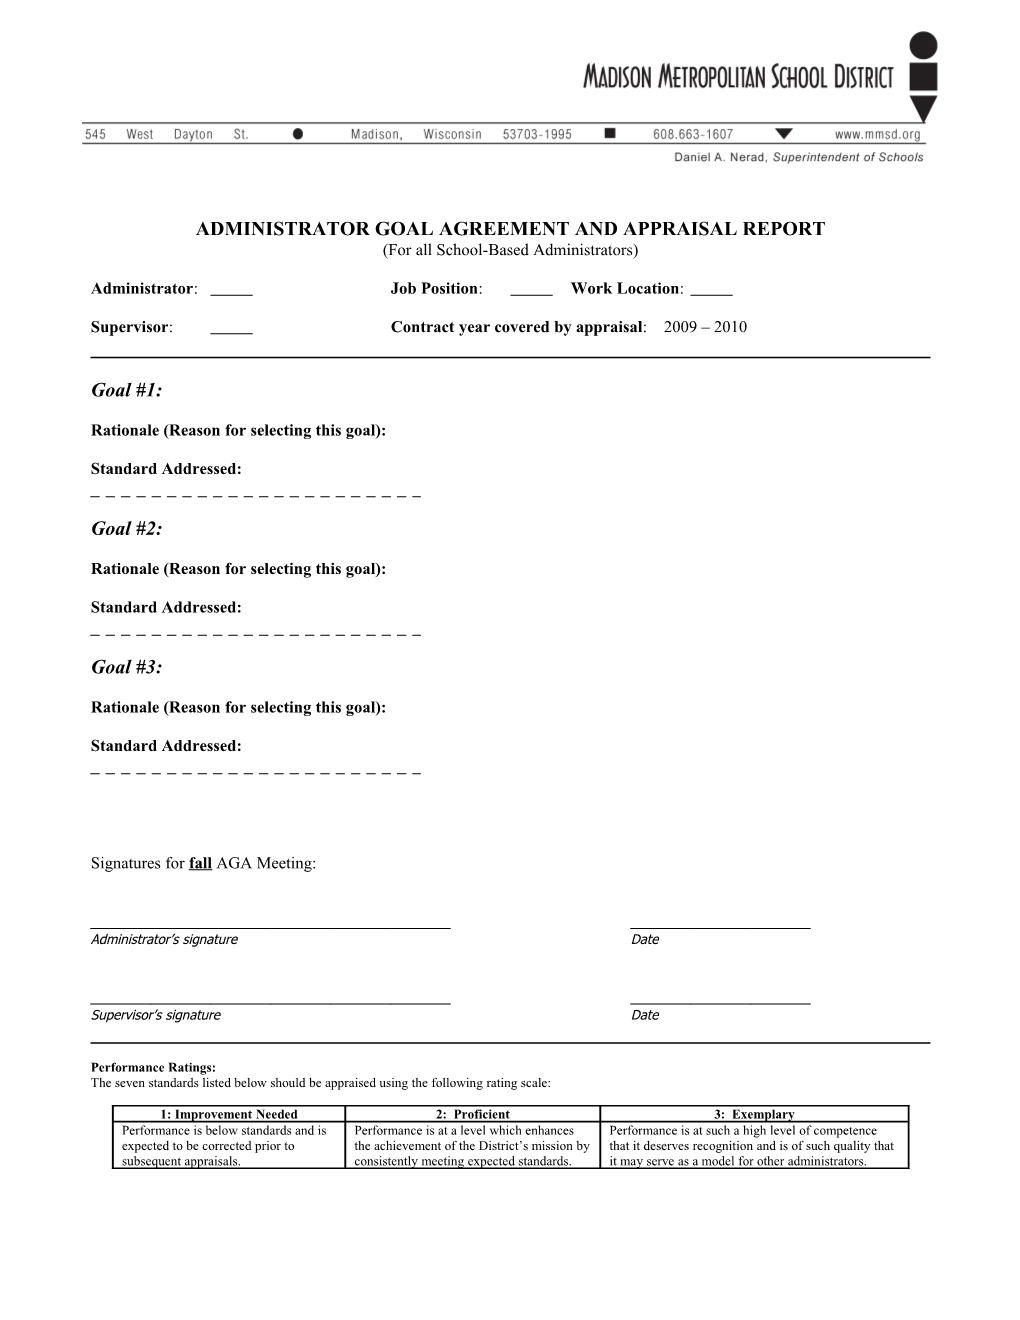 Administrator Goal Agreement and Appraisal Report